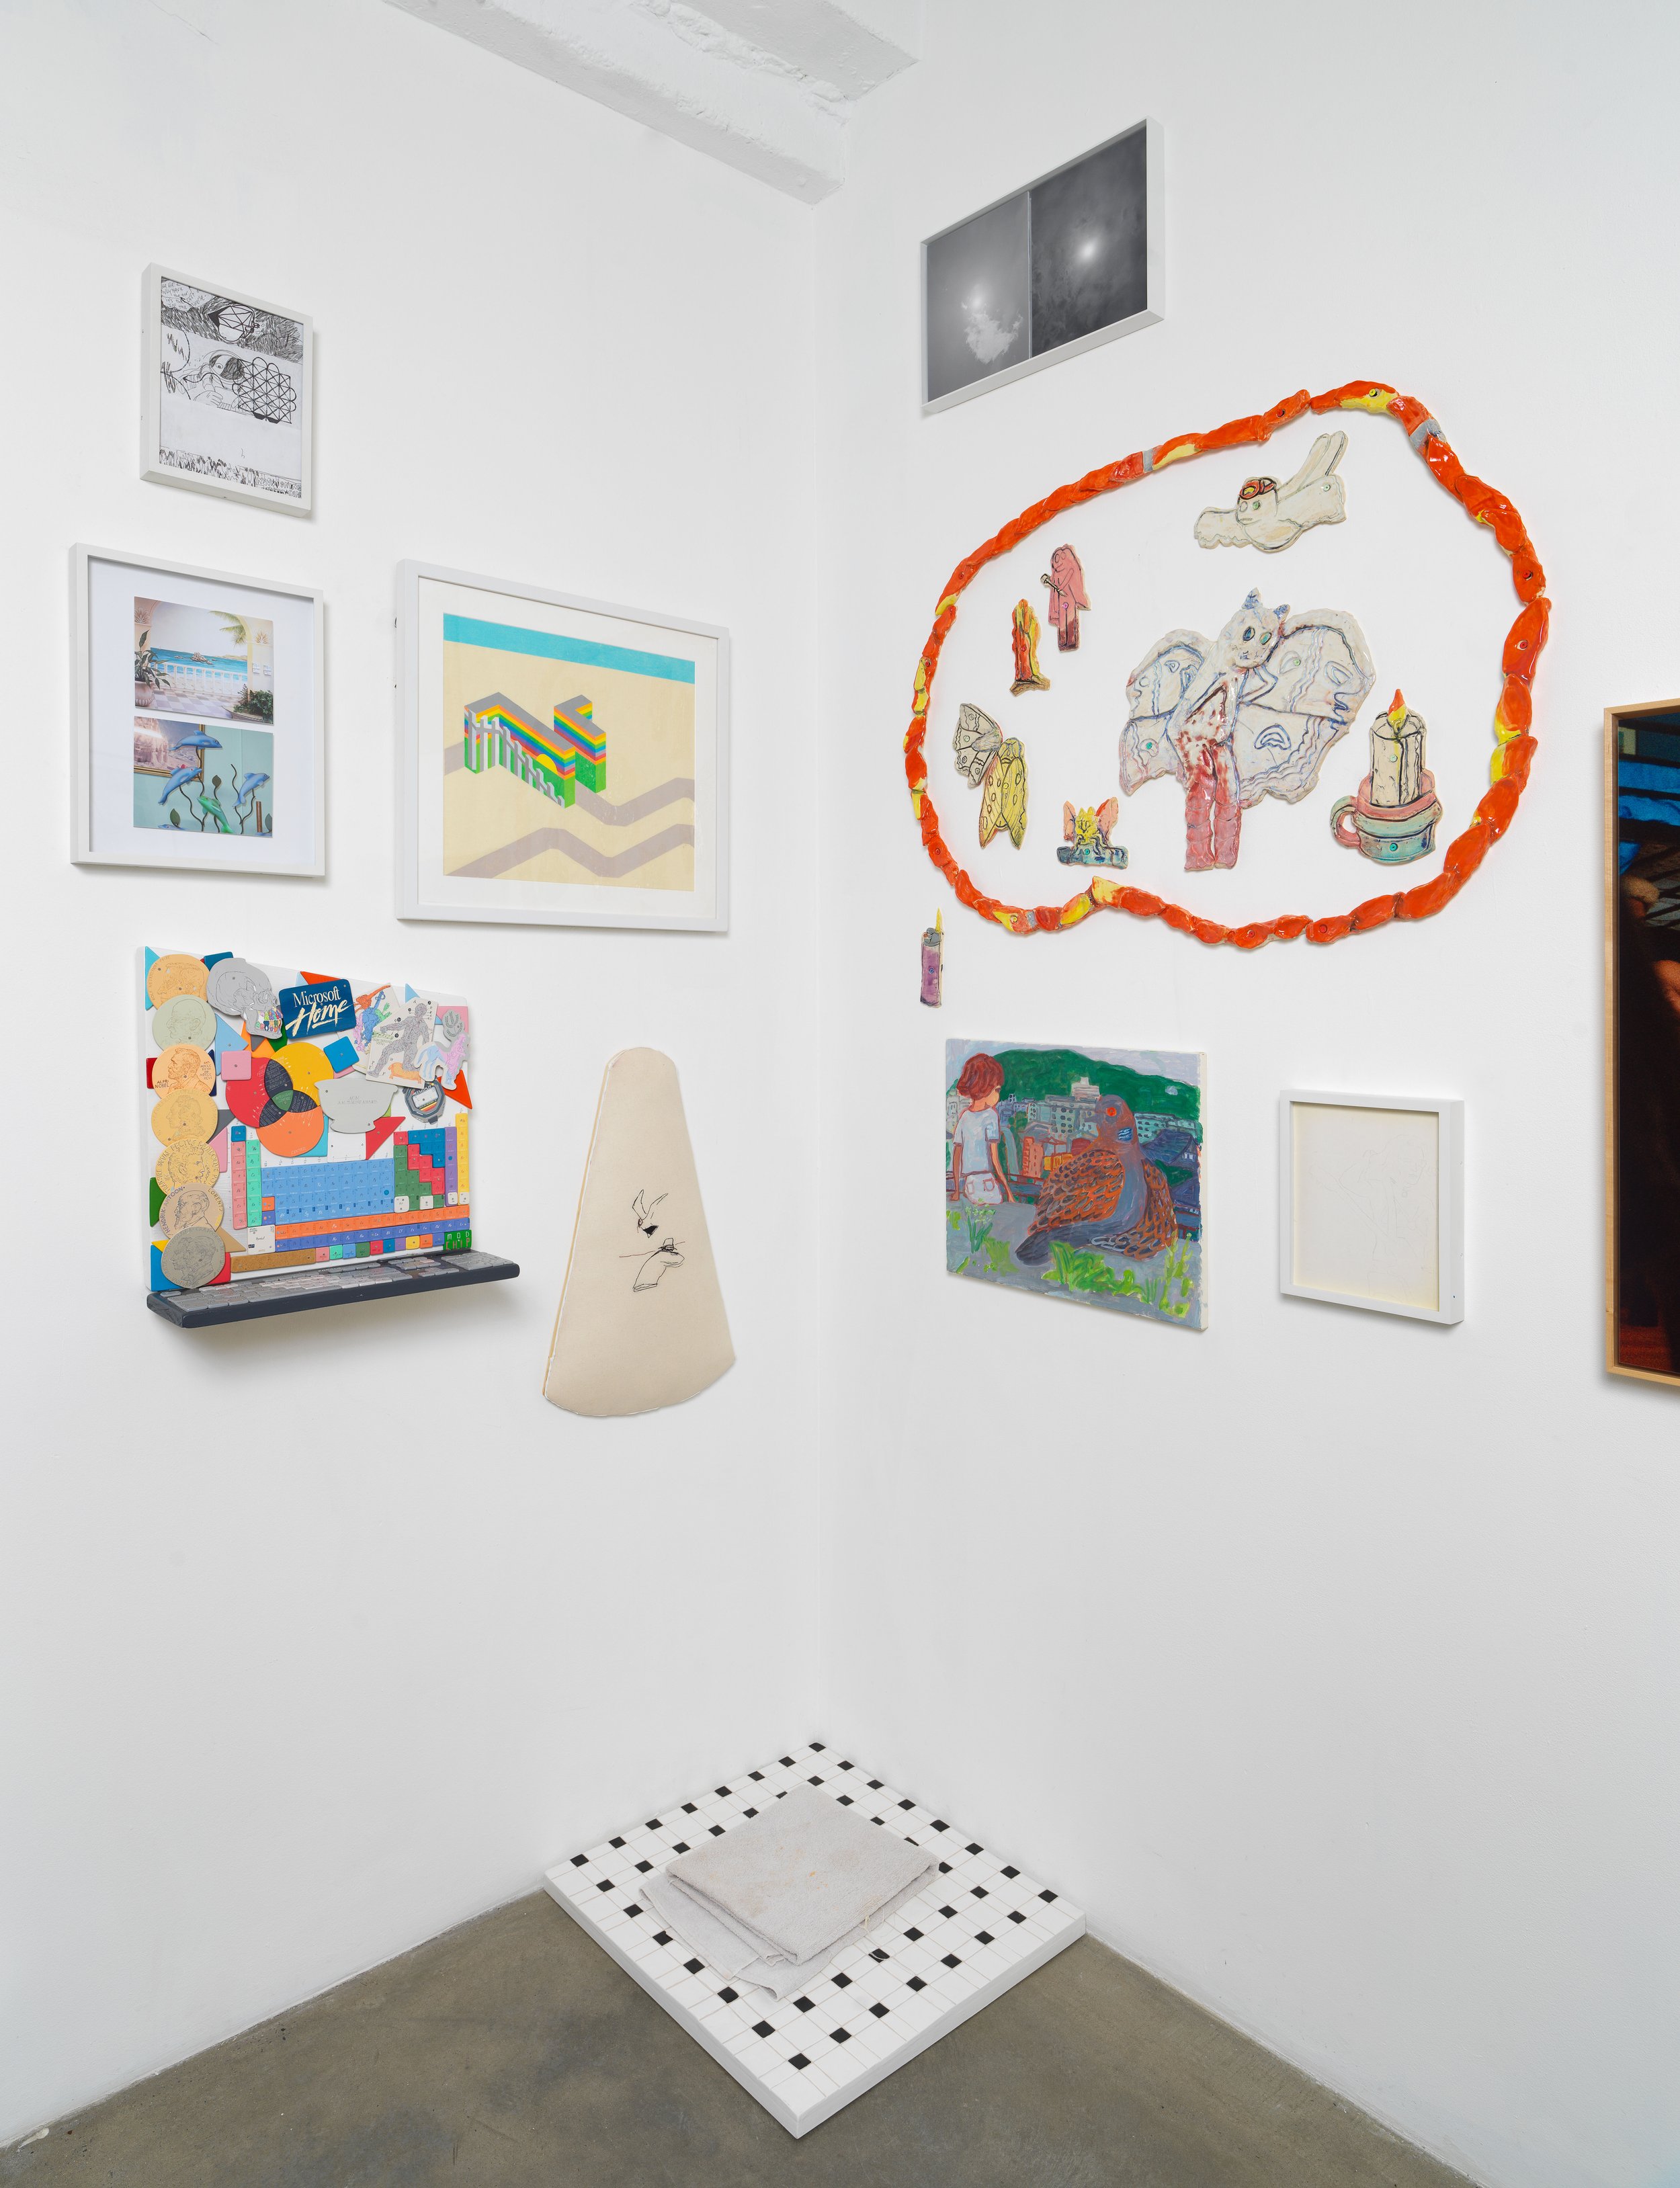 Curated by Scott Alario at Kristen Lorello Gallery, NYC